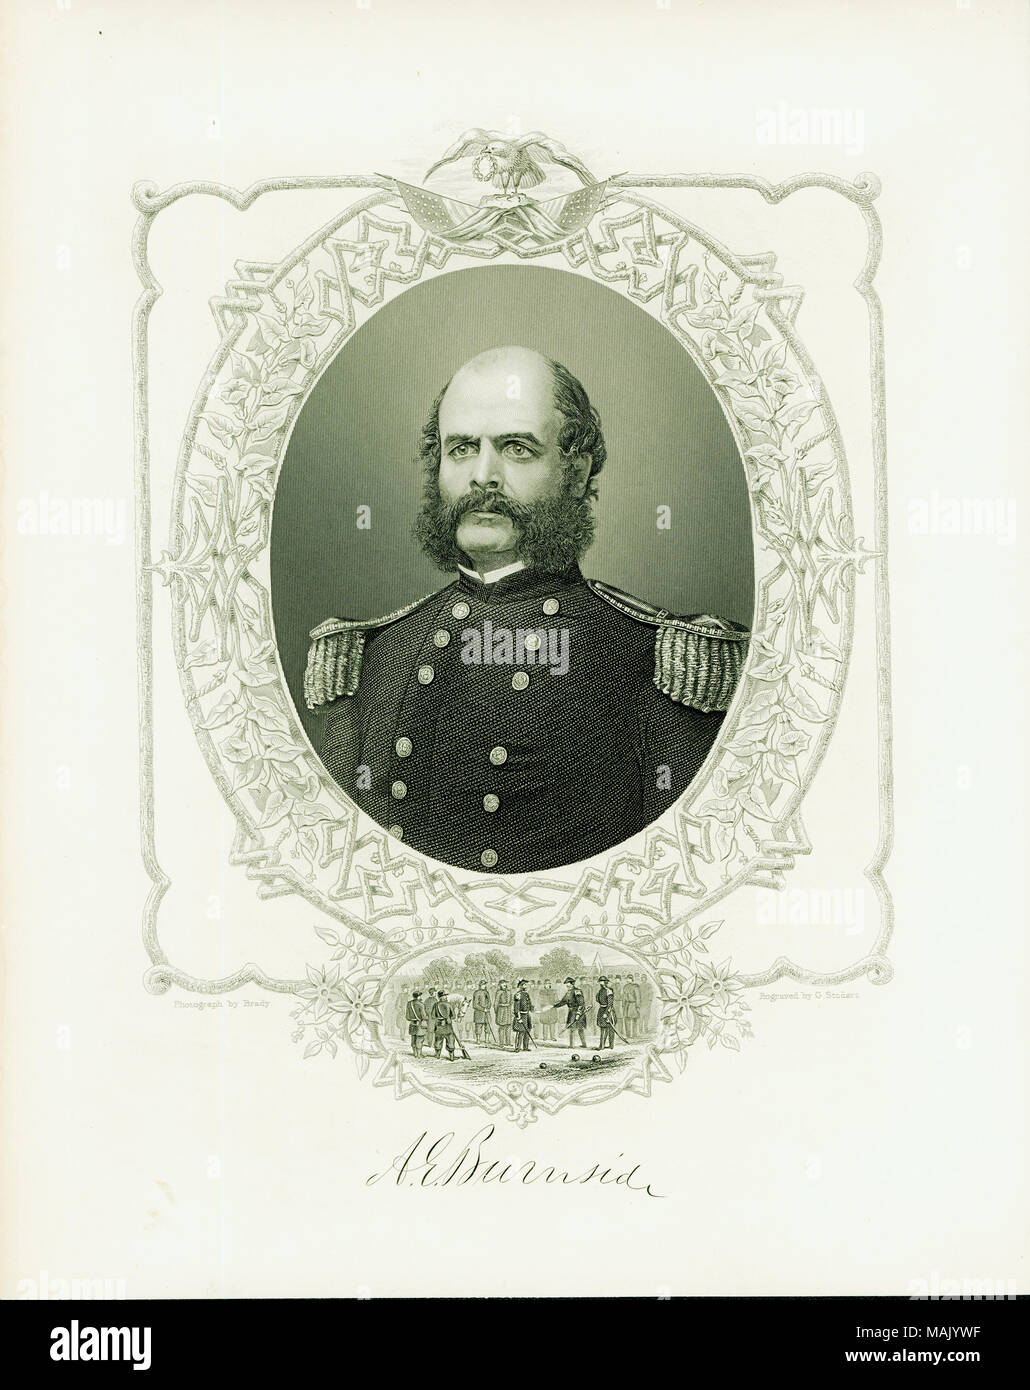 Bust portrait of a man in uniform with an image of a frame and a small scene of troops in formation below portrait. 'A E Burnside' (signature printed below image). 'From: The Great Civil War - Vol. II. by Robt. Tomes, M. D. and Benjamin G. Smith New York Virtue and Yorston 12 Dey [?] Street 1865' (written on reverse side). Taken from 'The Great Civil War, vol. II.' by Robert Tomes, M.D. and Benjamin G. Smith. Book was published by Virtue and Yorston, 1865. Title: Ambrose E. Burnside, General (Union).  . 1865. G. Stodart Stock Photo